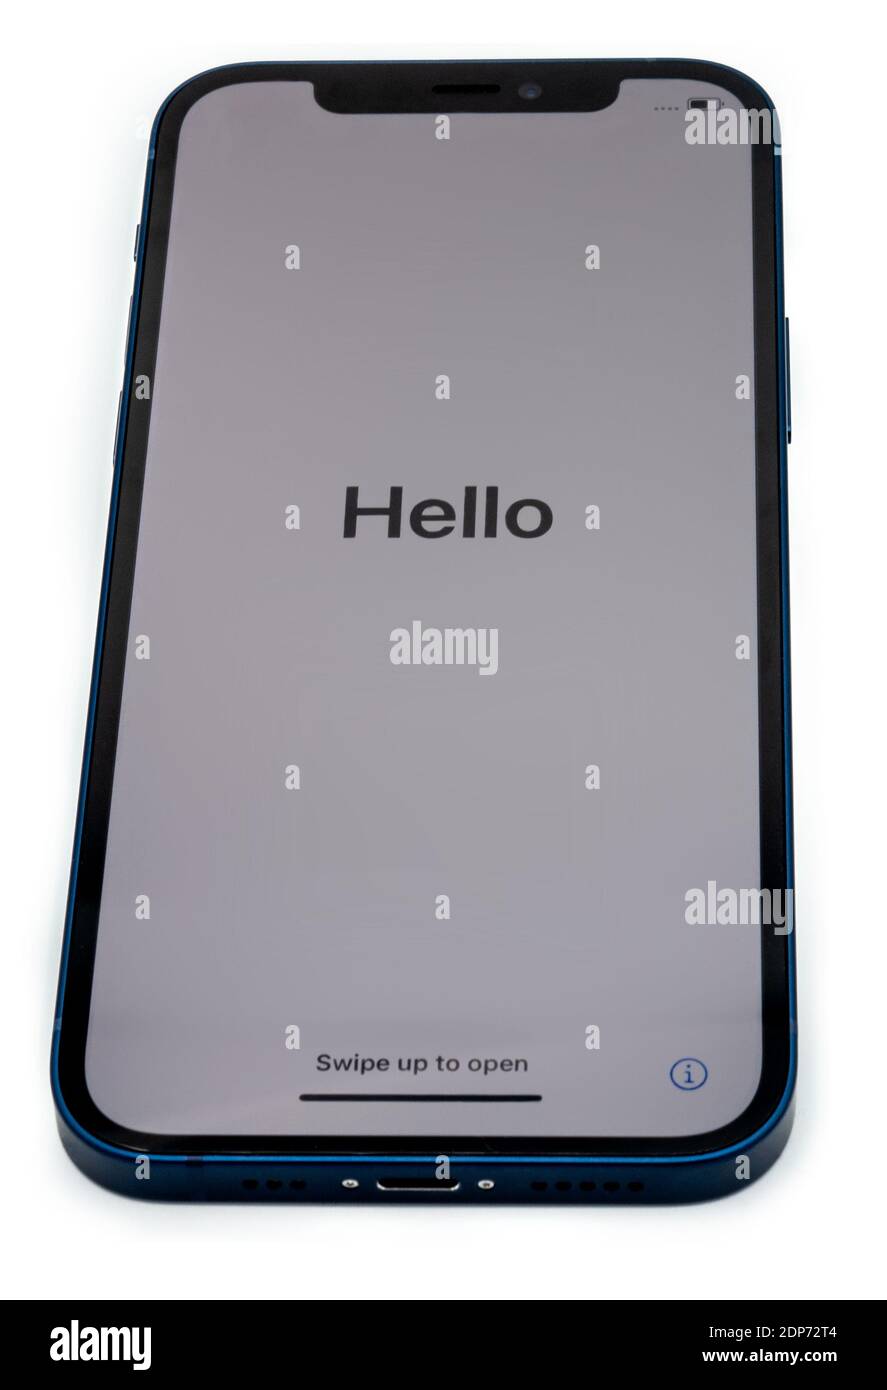 Ostfildern - Germany, December 5, 2020: Apple iPhone 12 in blue colour with slight shadows on perfectly white background. The phone is showing the Stock Photo